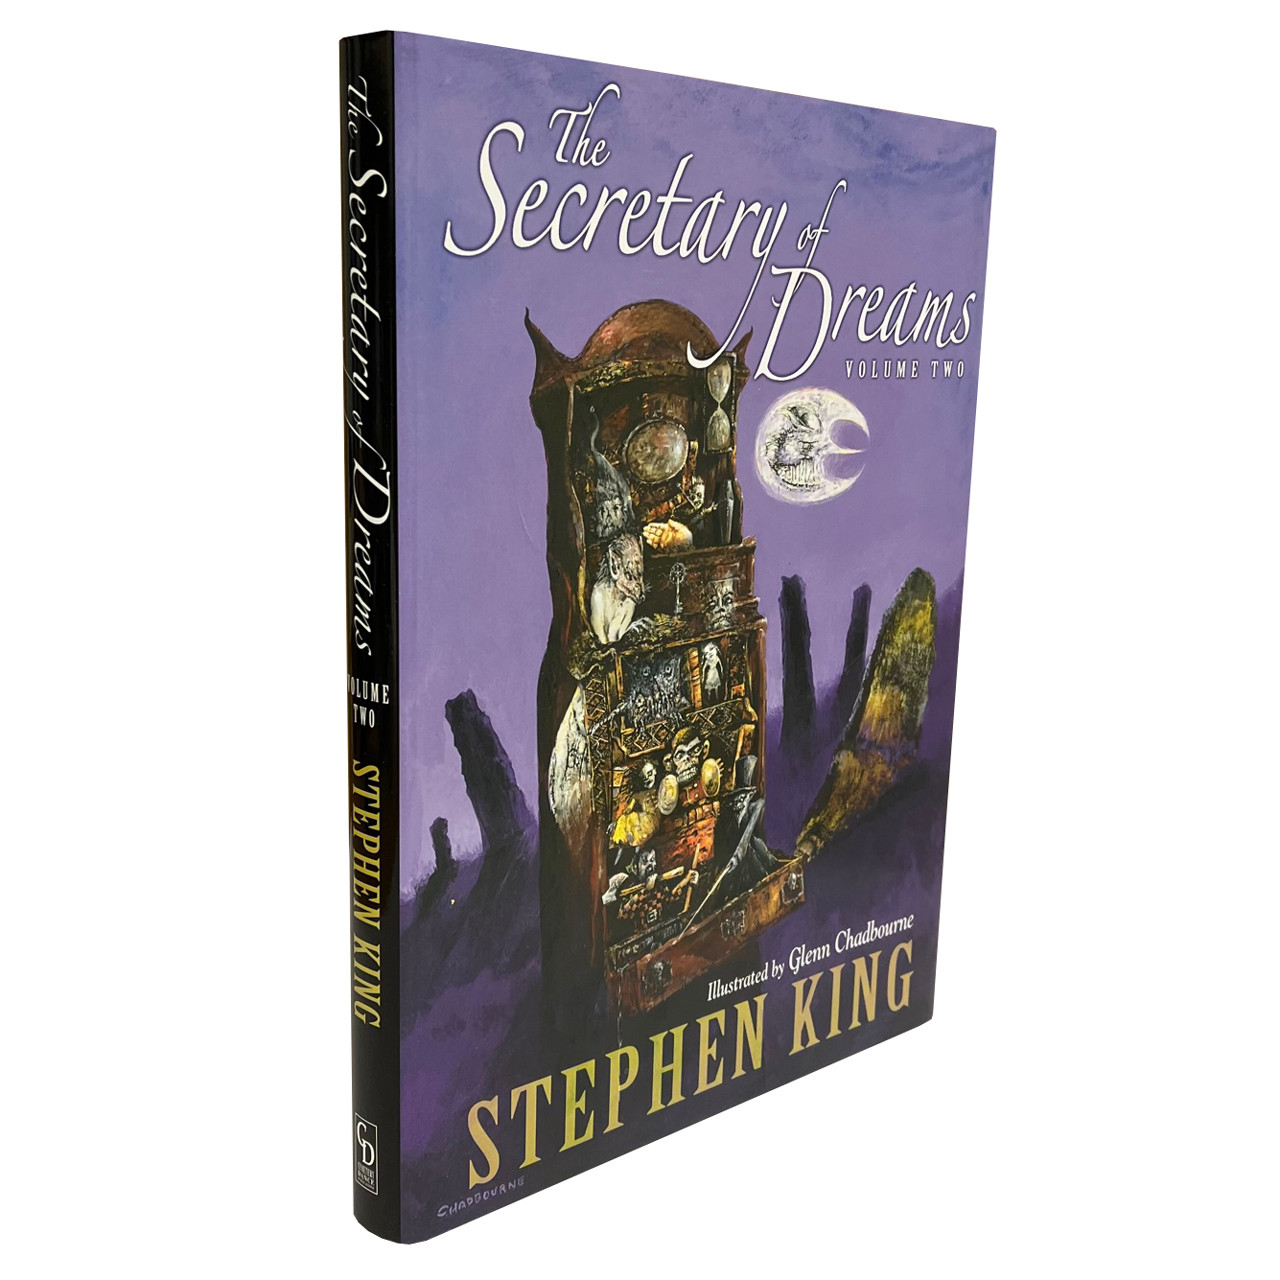 Stephen King "The Secretary of Dreams" Volume Two, Slipcased Limited Gift Edition, First Edition, Illustrated by Glenn Chadbourne